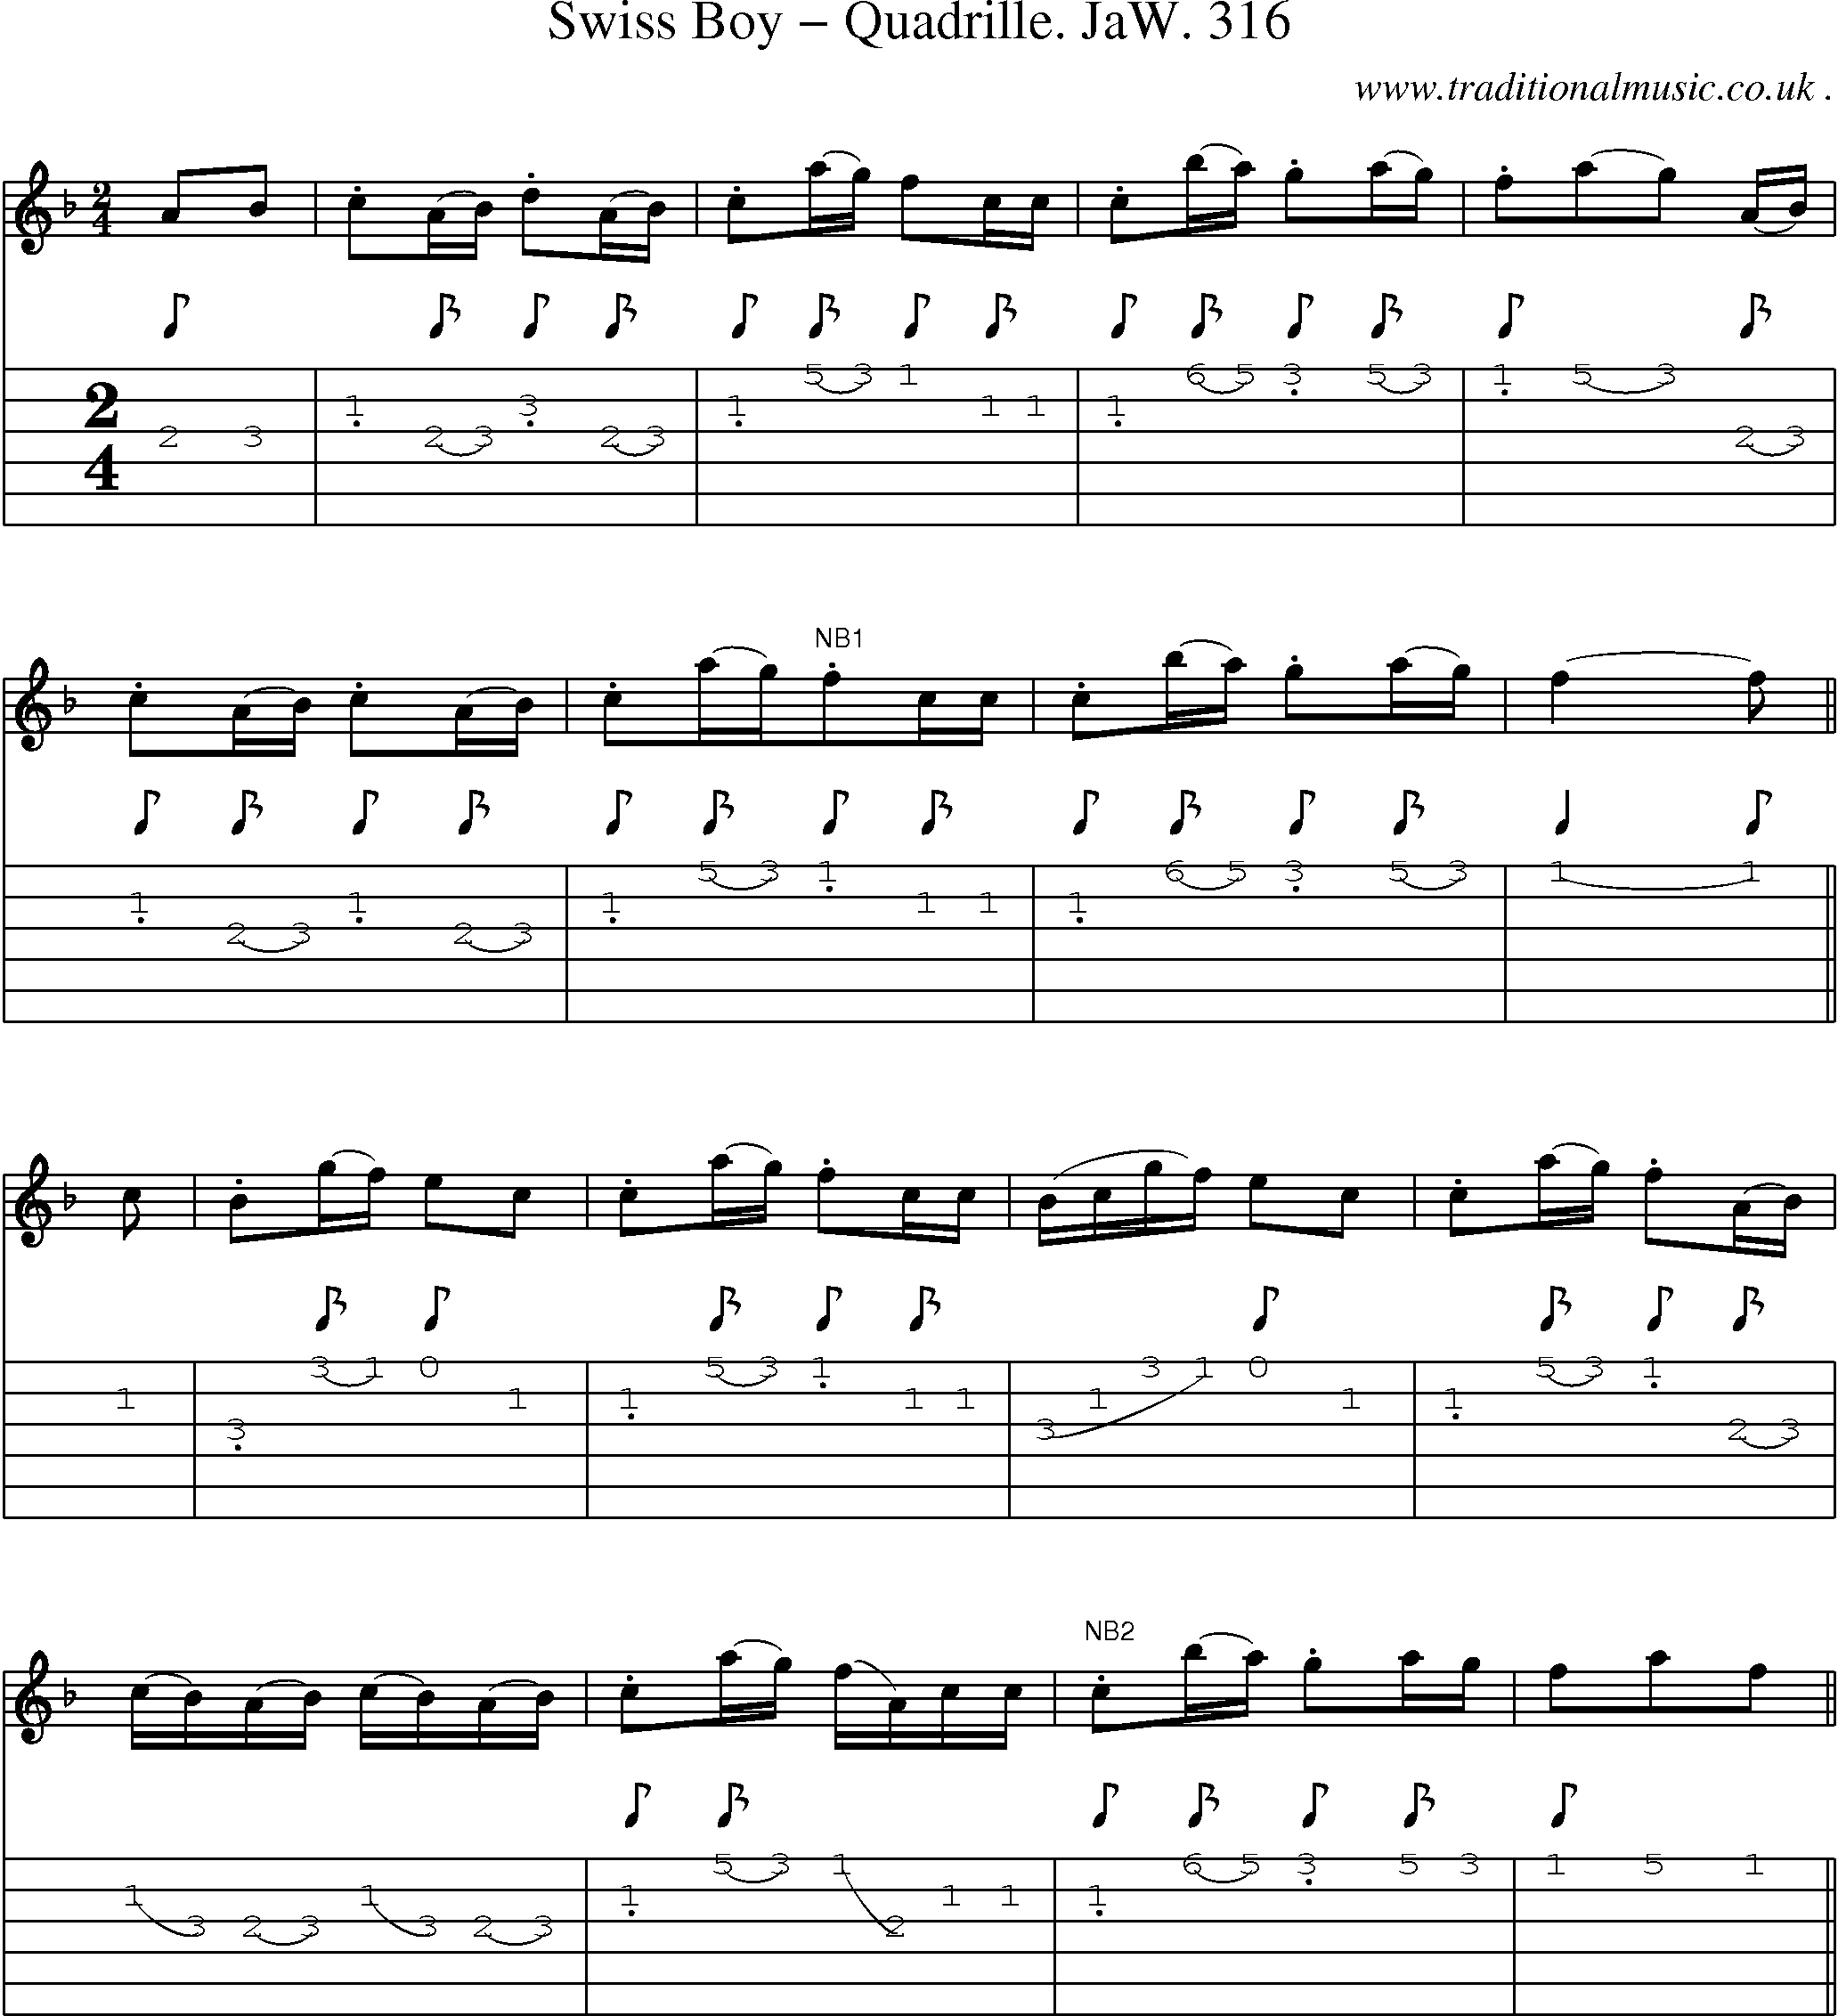 Sheet-Music and Guitar Tabs for Swiss Boy Quadrille Jaw 316